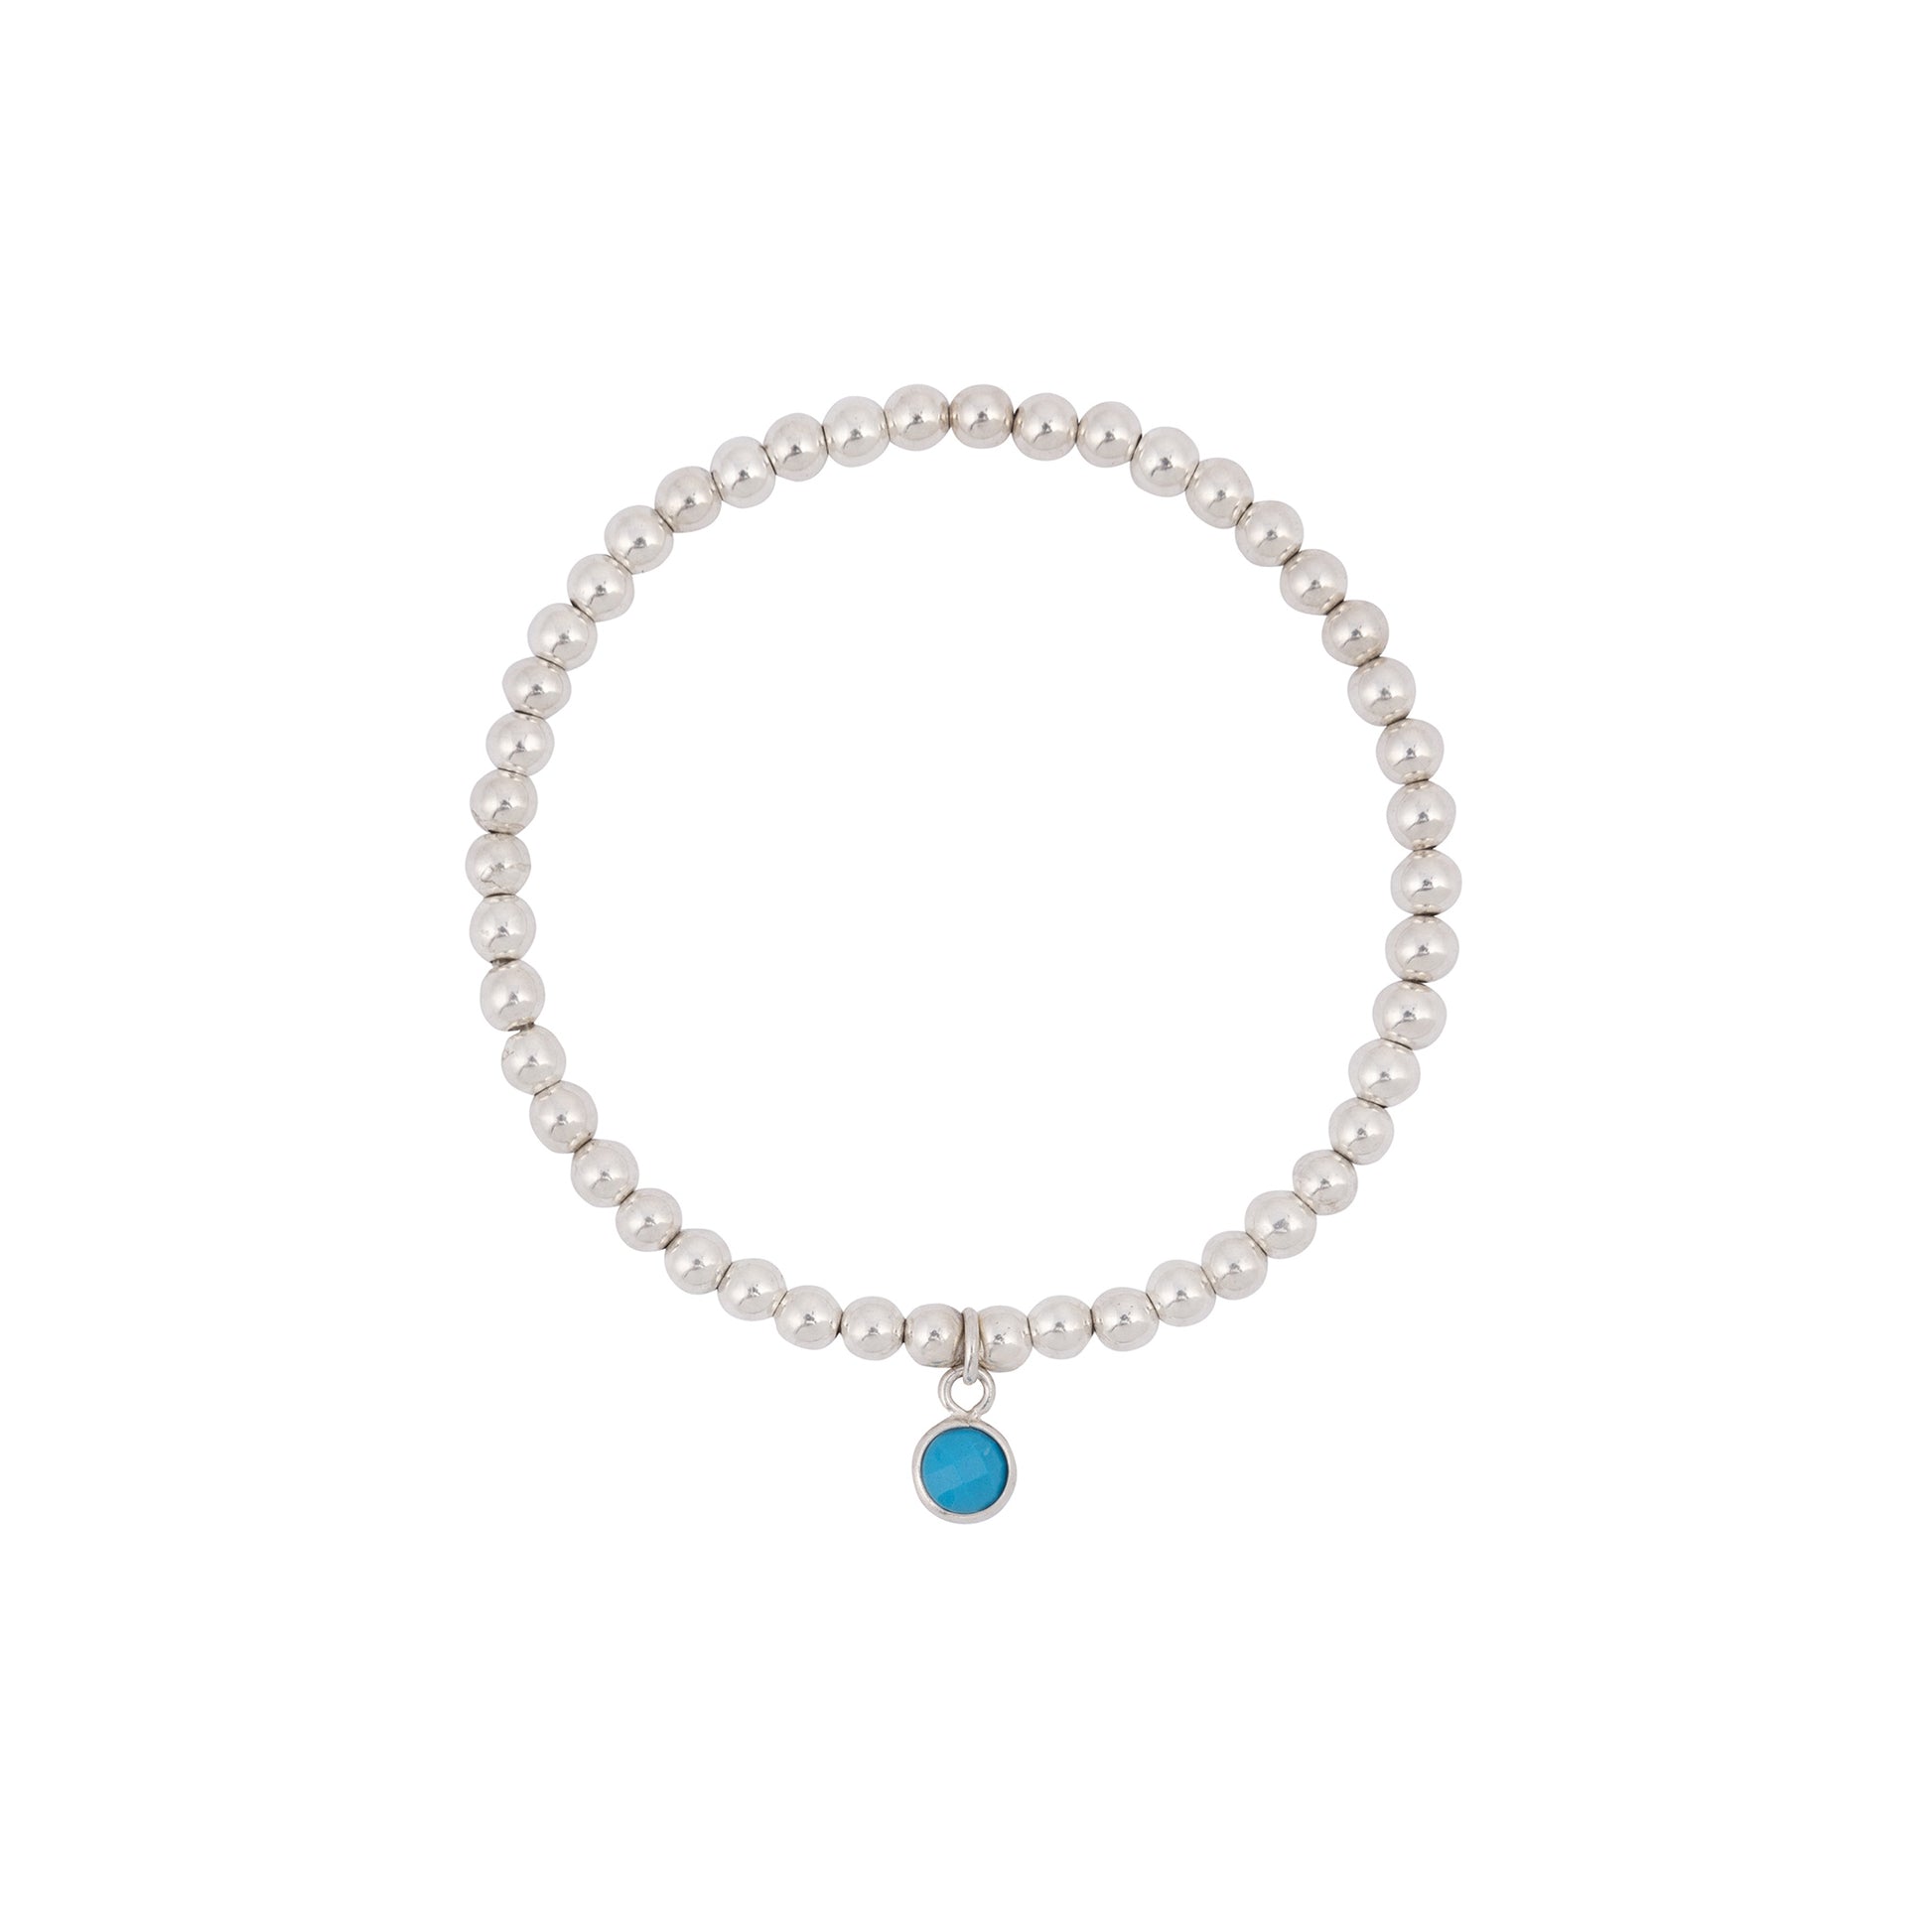 A delicate sterling silver bead bracelet featuring a central turquoise birthstone charm. The bracelet consists of evenly spaced, shiny silver beads and is simple yet elegant, highlighting the small turquoise pendant as its focal point. Perfect for December birthstone bracelets, the Turquoise December Birthstone Bracelet by Made Here with Love.